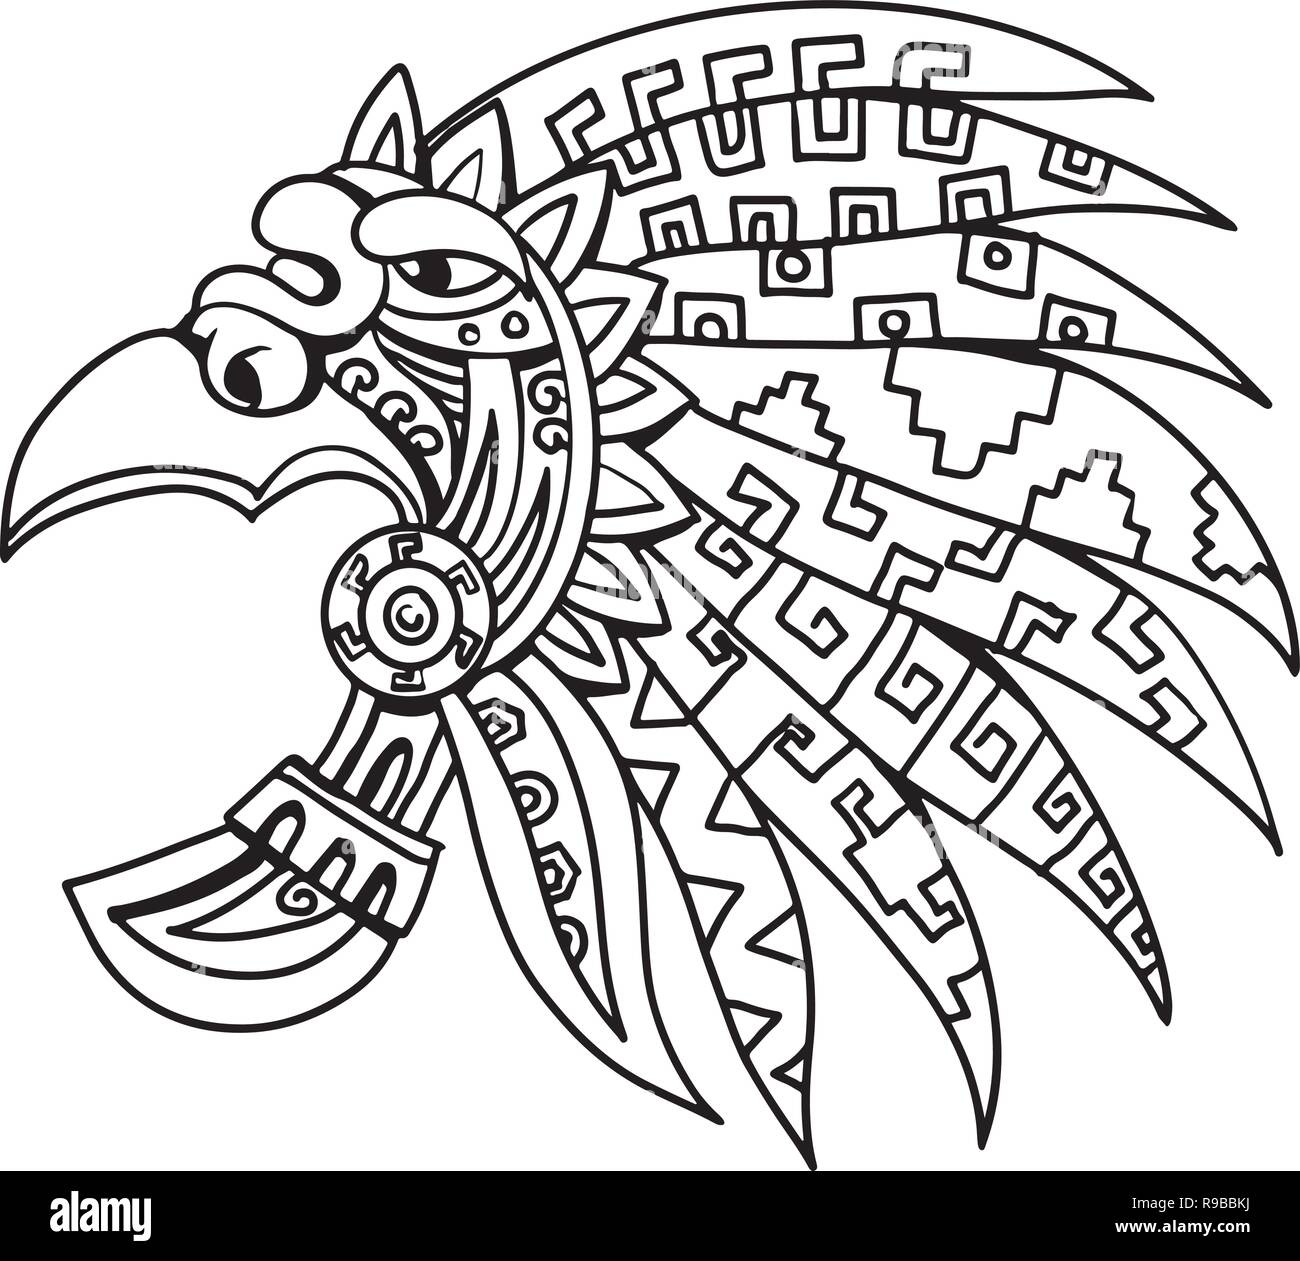 Drawing sketch style illustration of an Aztec feathered headdress, a flamboyant and colourful costume piece worn by Aztec nobility, elite and priests  Stock Vector